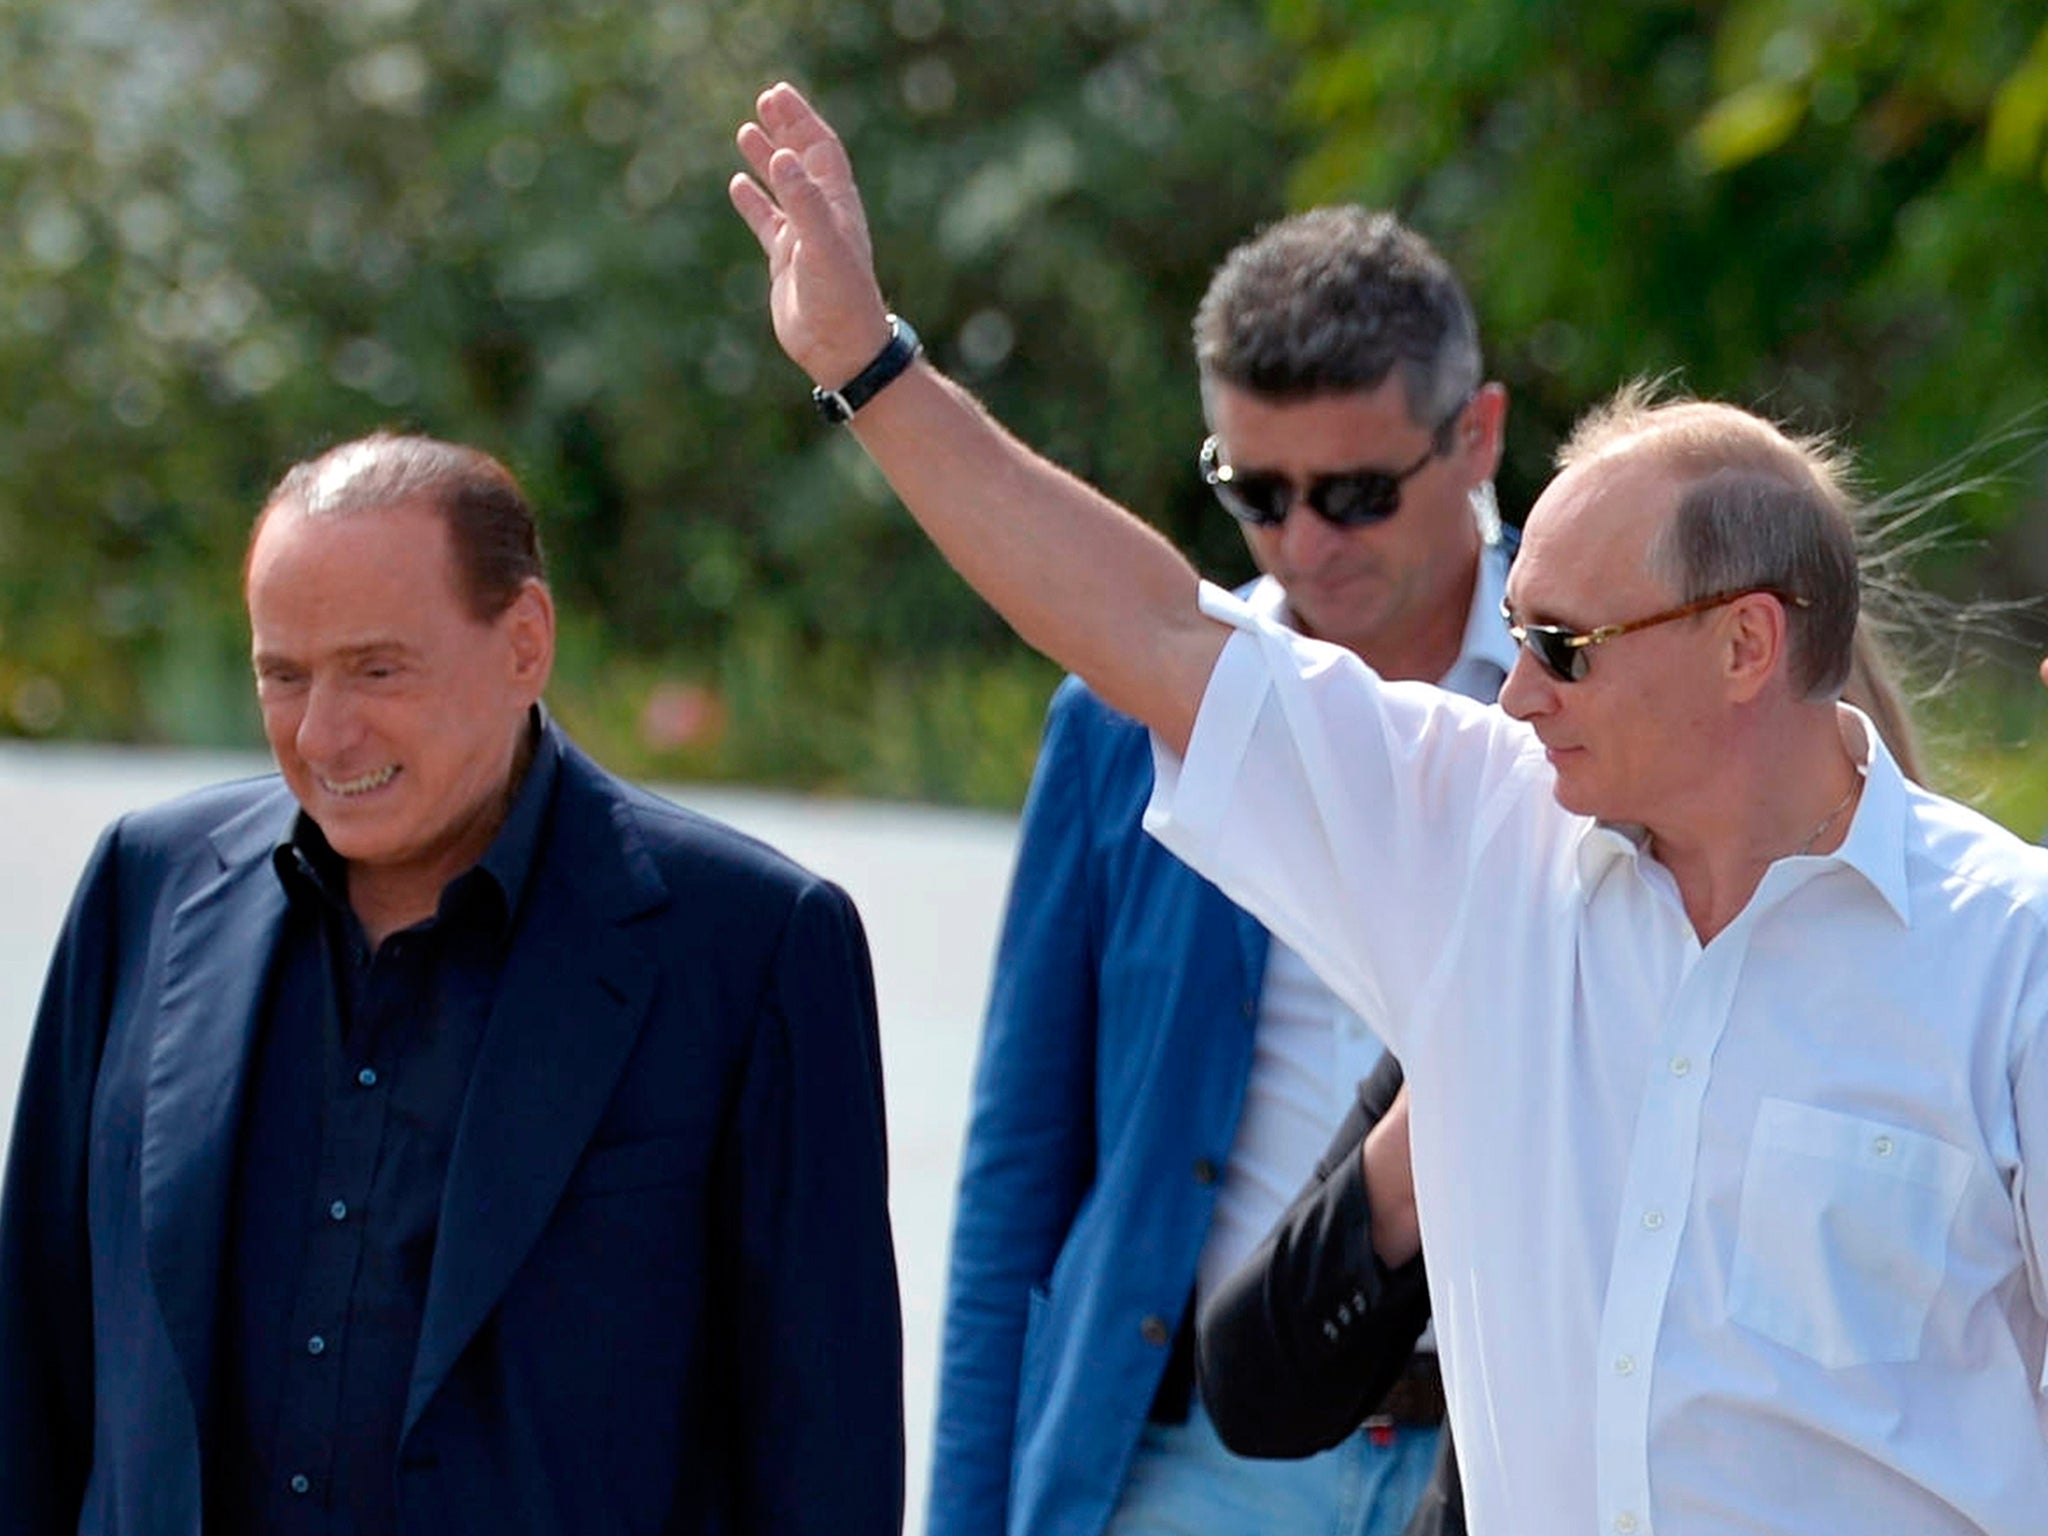 Russian President Vladimir Putin, right, and former Italian Prime Minister Silvio Berlusconi visit the Khan's Palace in the town of Bakhchisarai, Crimea